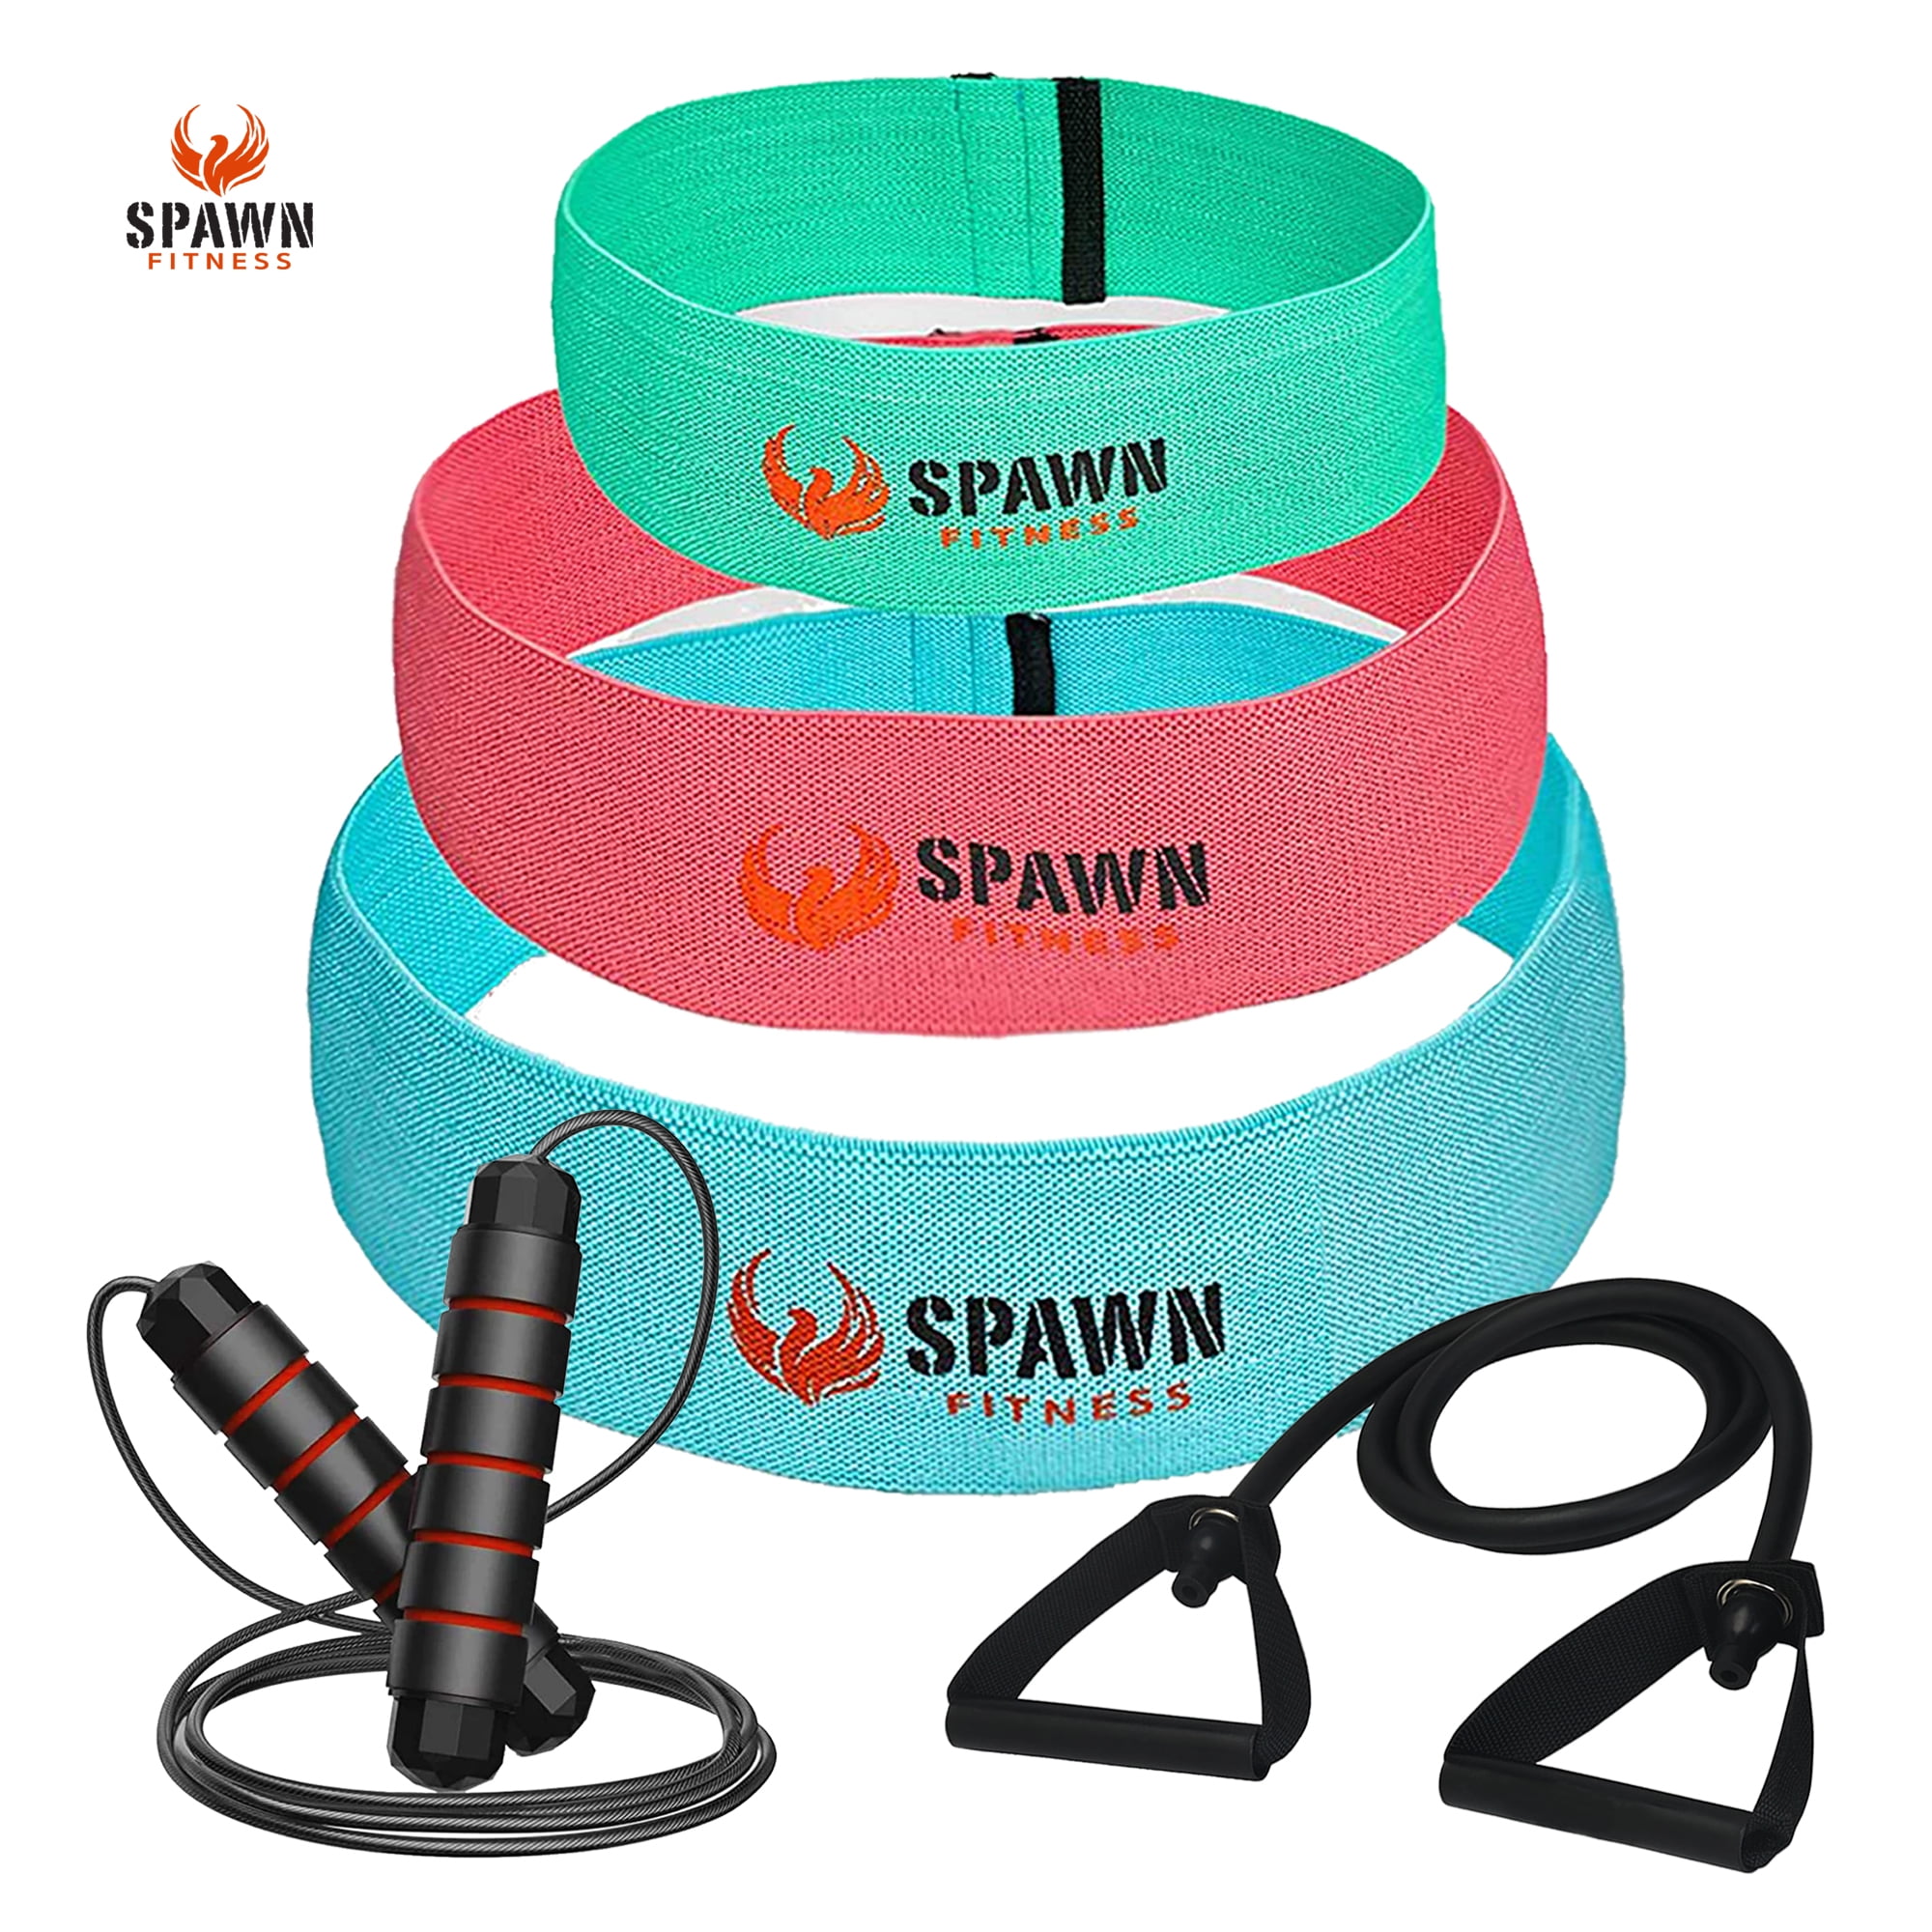 Spawn Fitness Fabric Resistance Exercise Bands for Workout Fitness